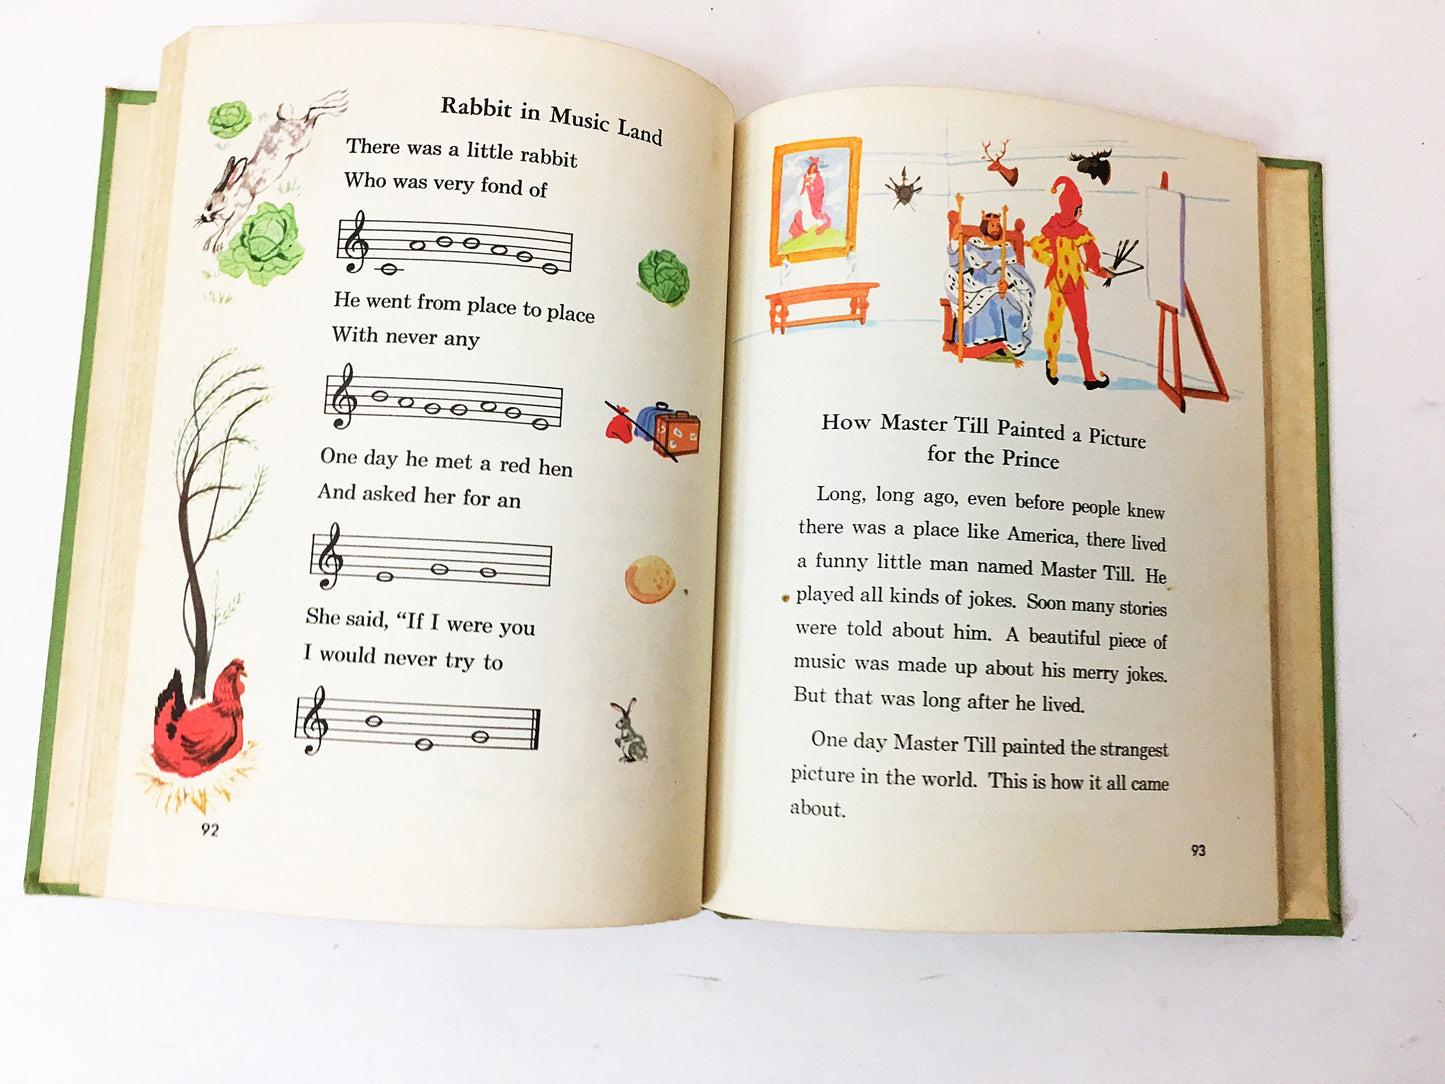 Doorways To Adventure. Early Reader book circa 1966. Laidlaw Brothers. Vintage green book. Beautiful decor gift. Children's book.